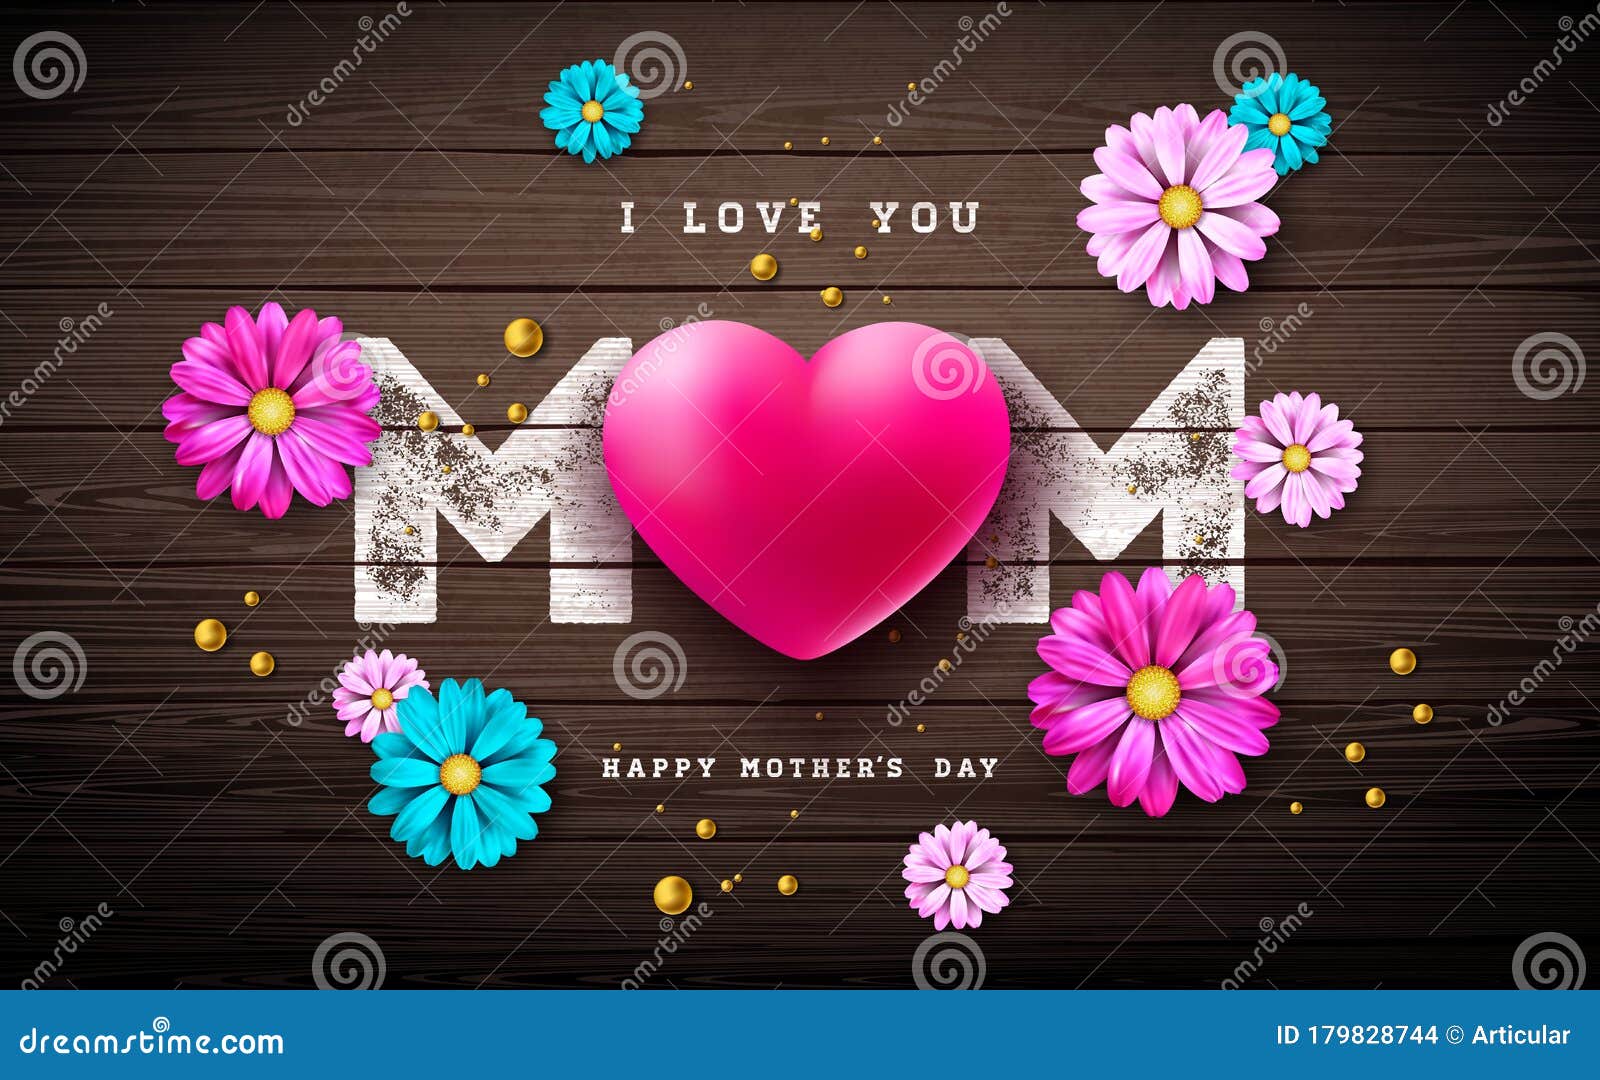 I Love You Mom Happy Mother's Day Stock Illustrations – 606 I Love ...